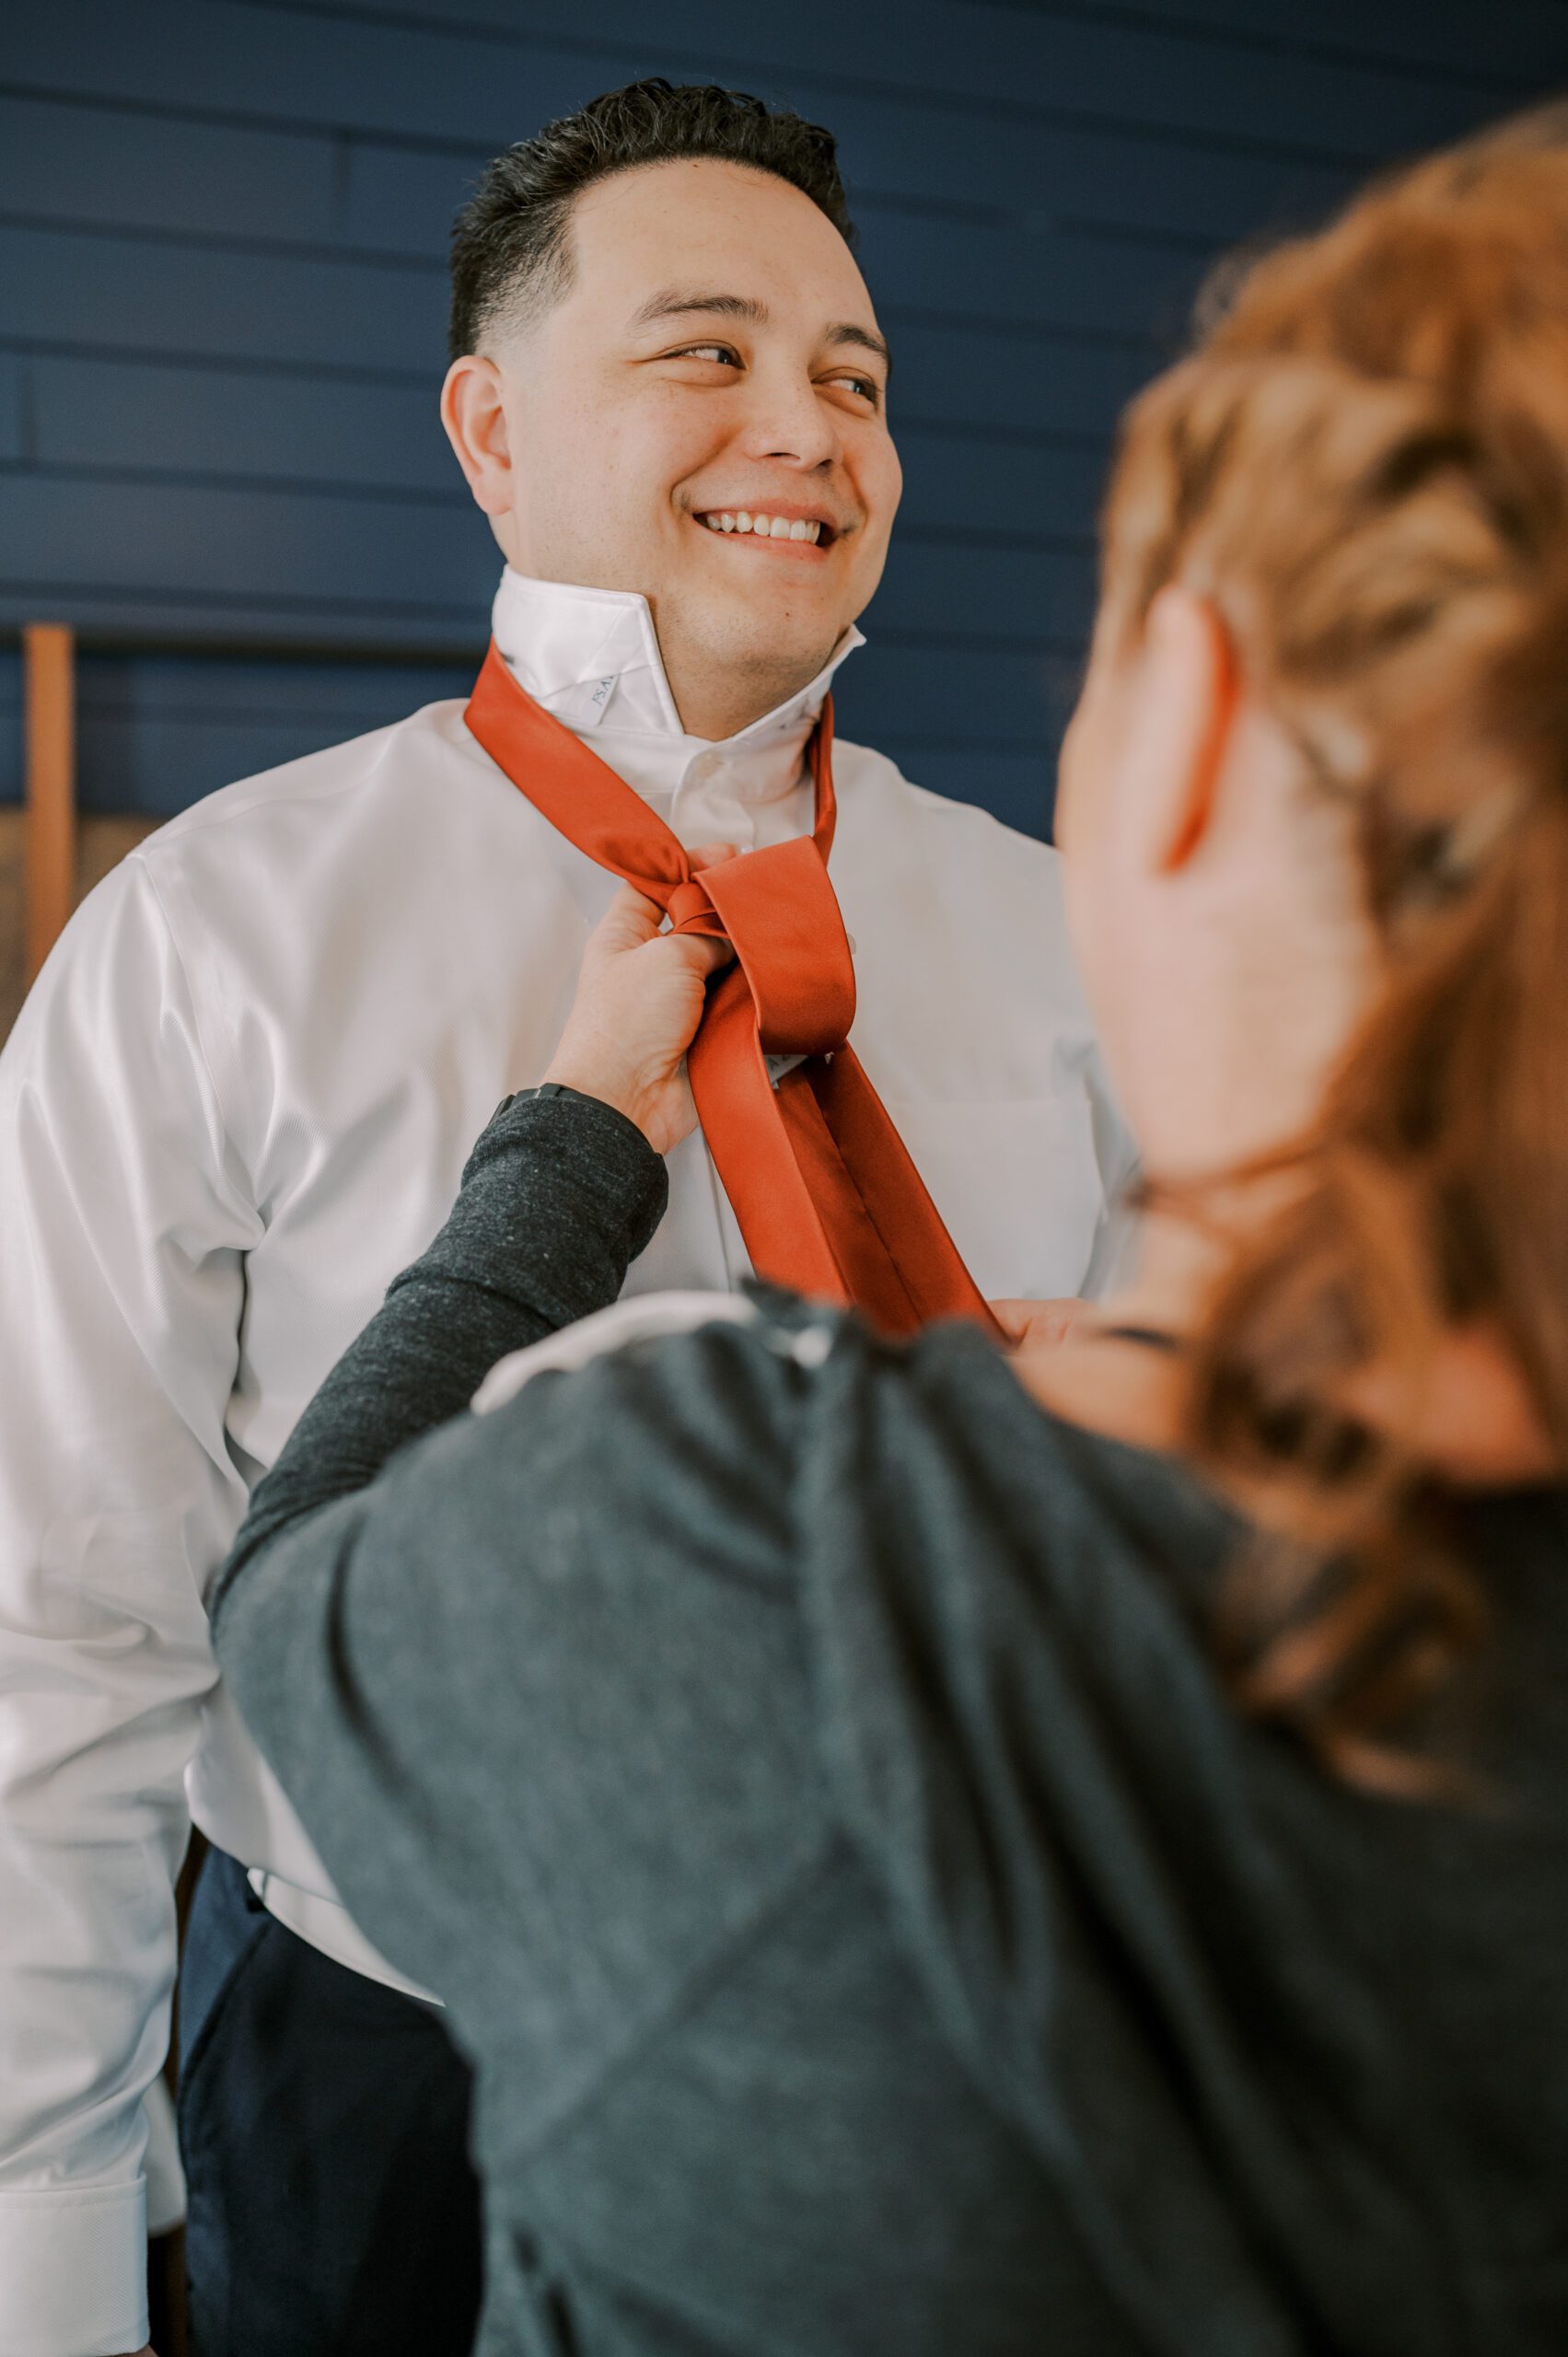 Groom smiling off to side while a woman ties his orange tie for him